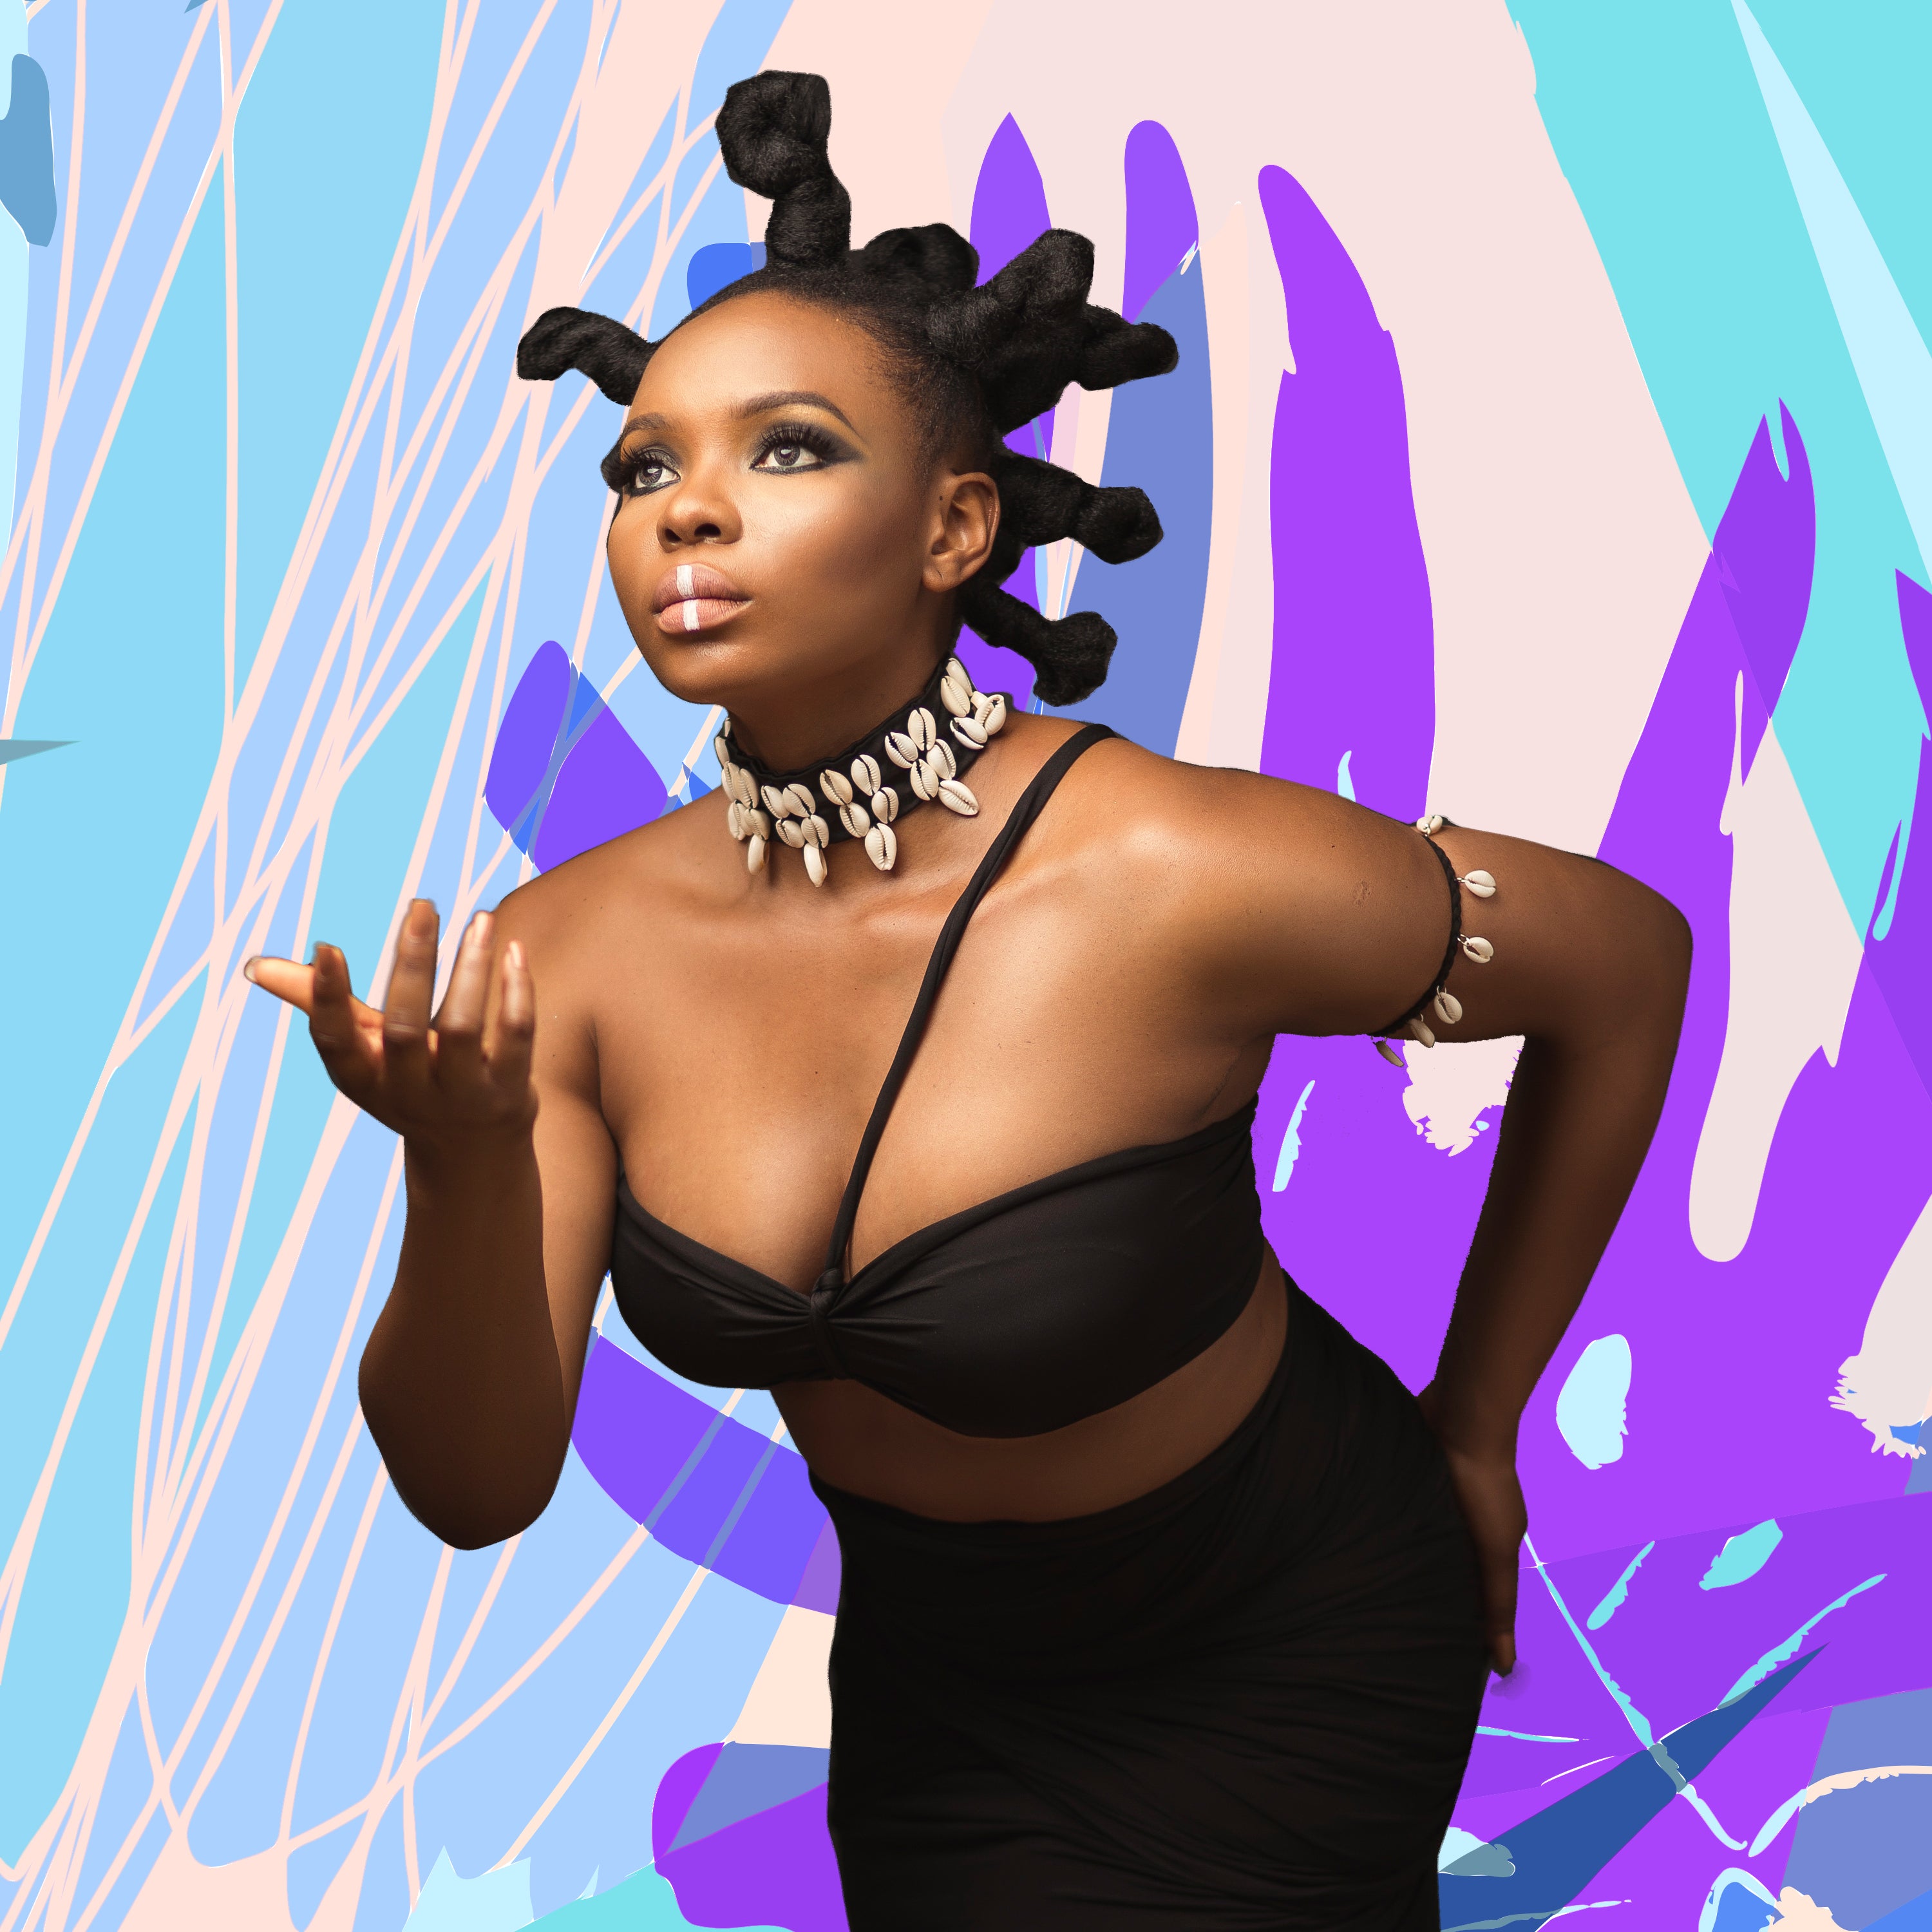 Nigeria's Yemi Alade Opens Up About Her Rise To Afropop Superstardom & Her Unique Connection With Her Fans